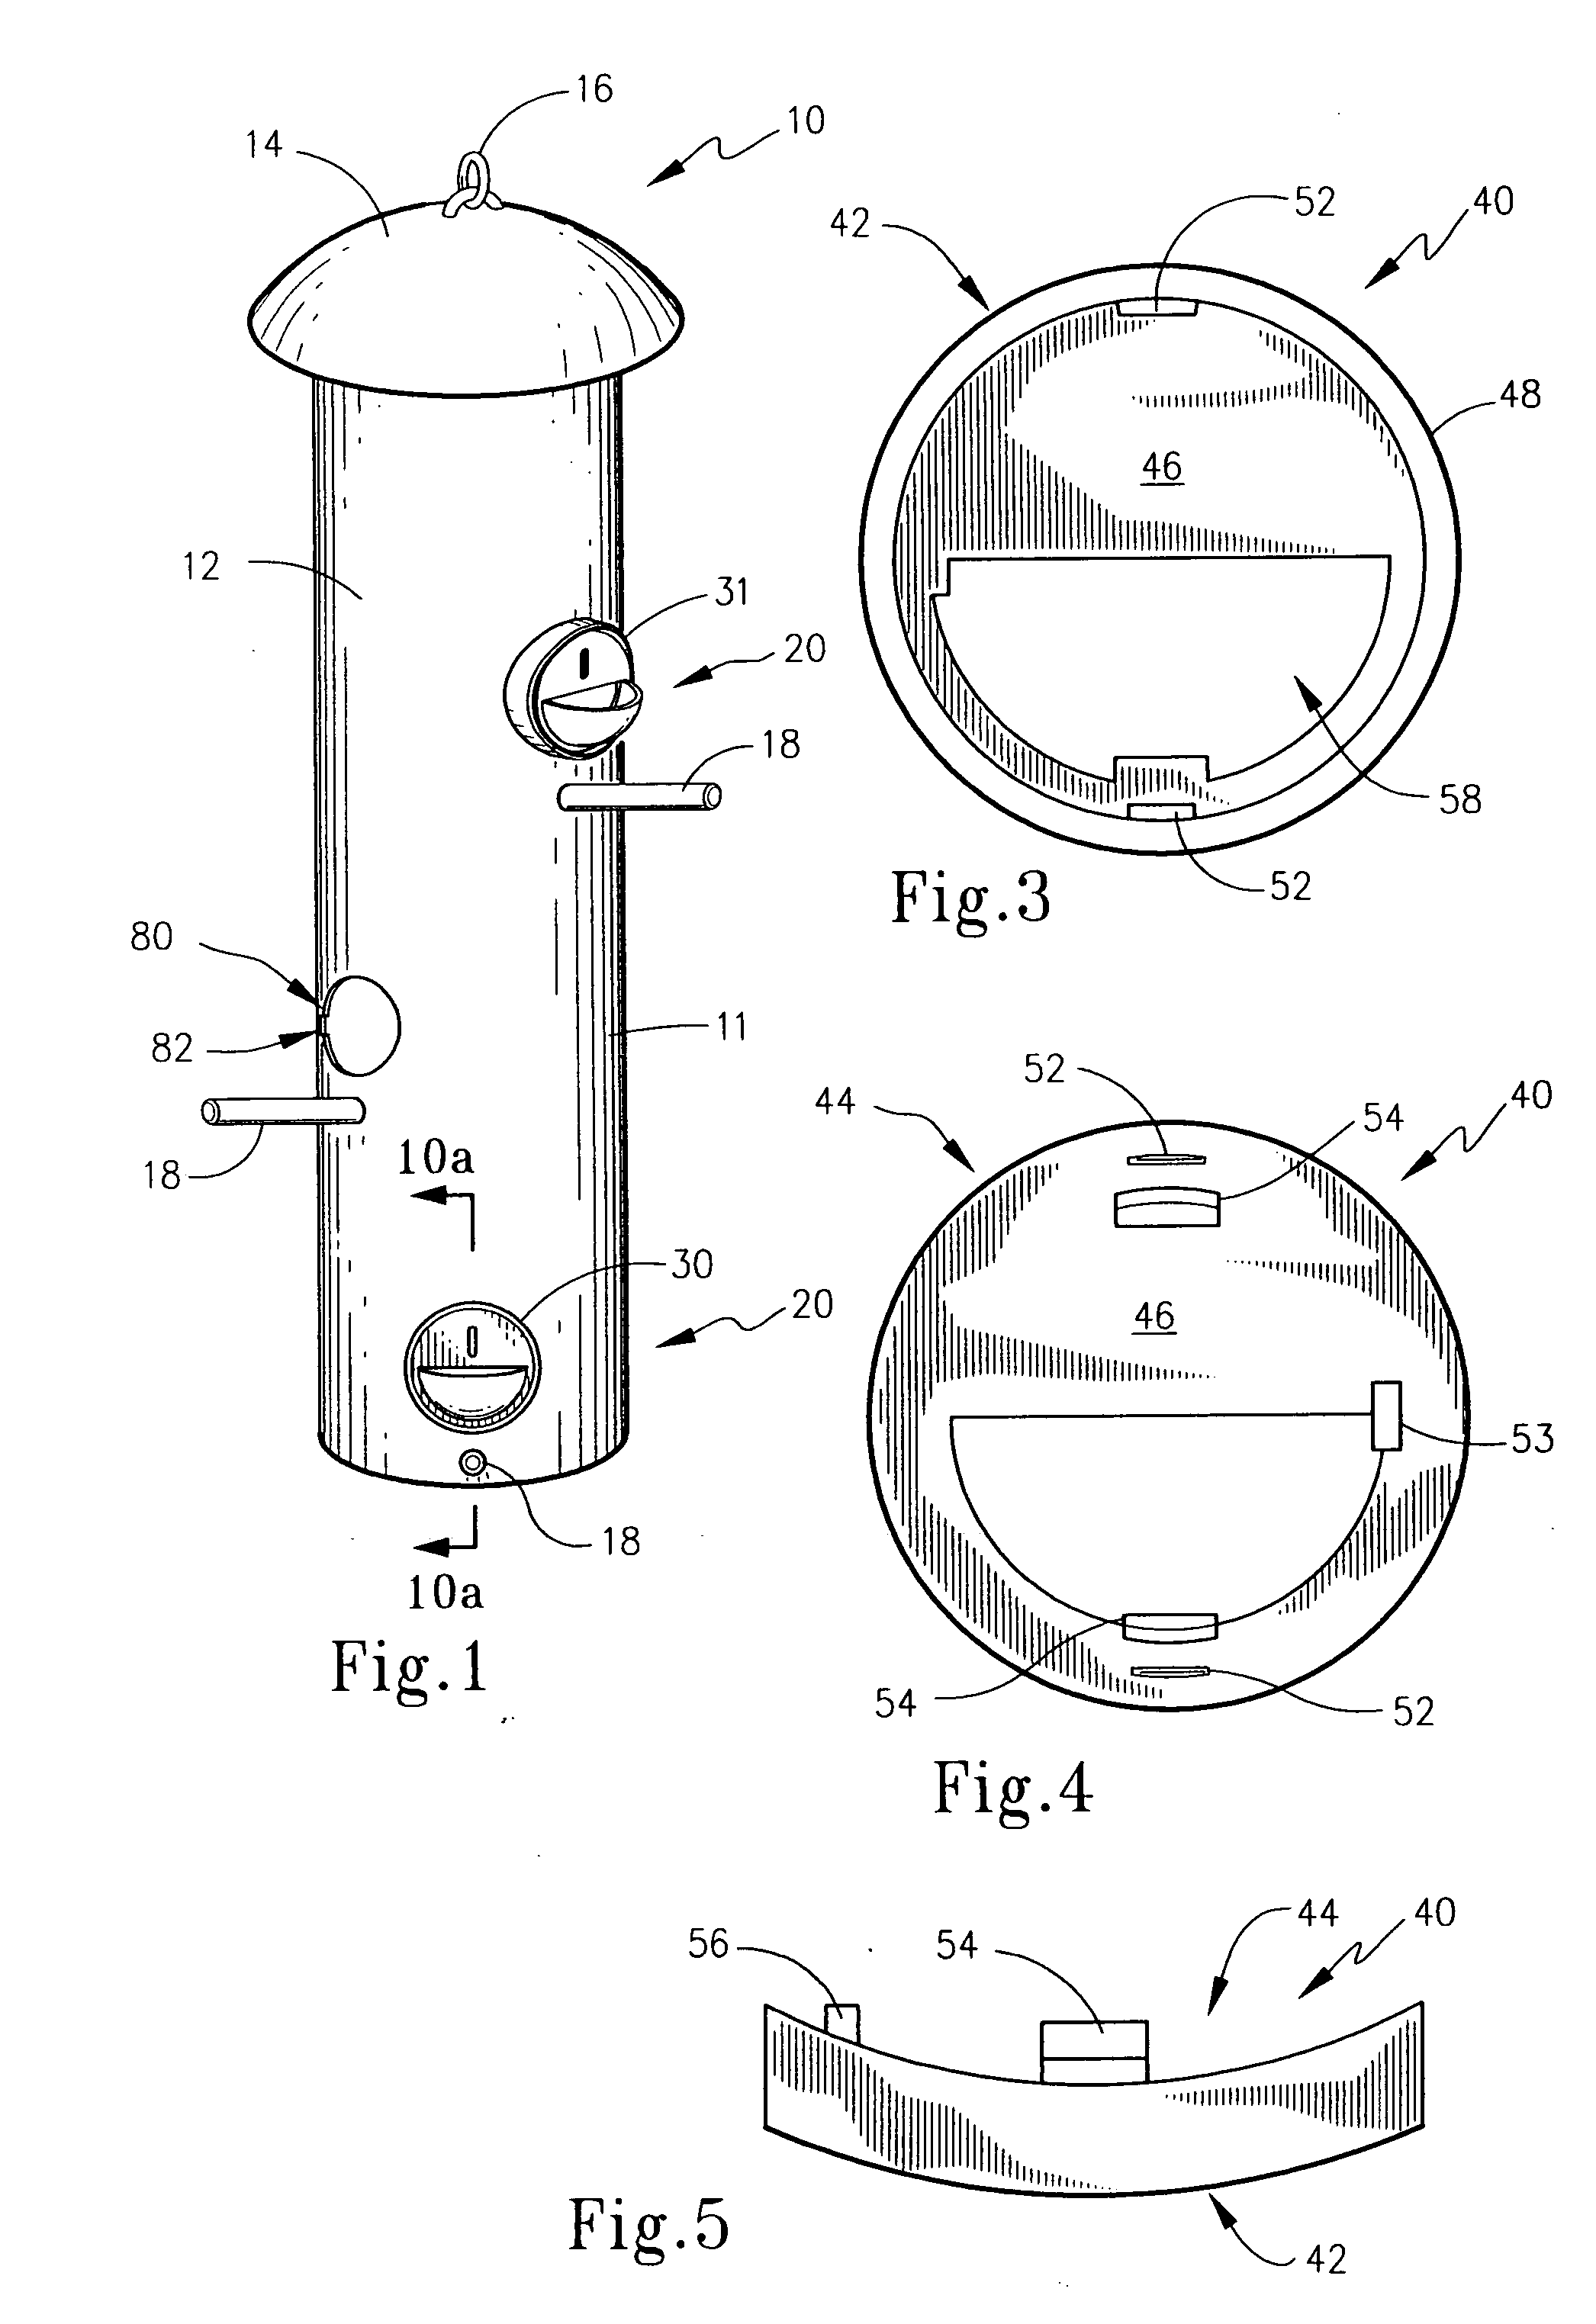 Birdfeeder and seed dispenser therefor